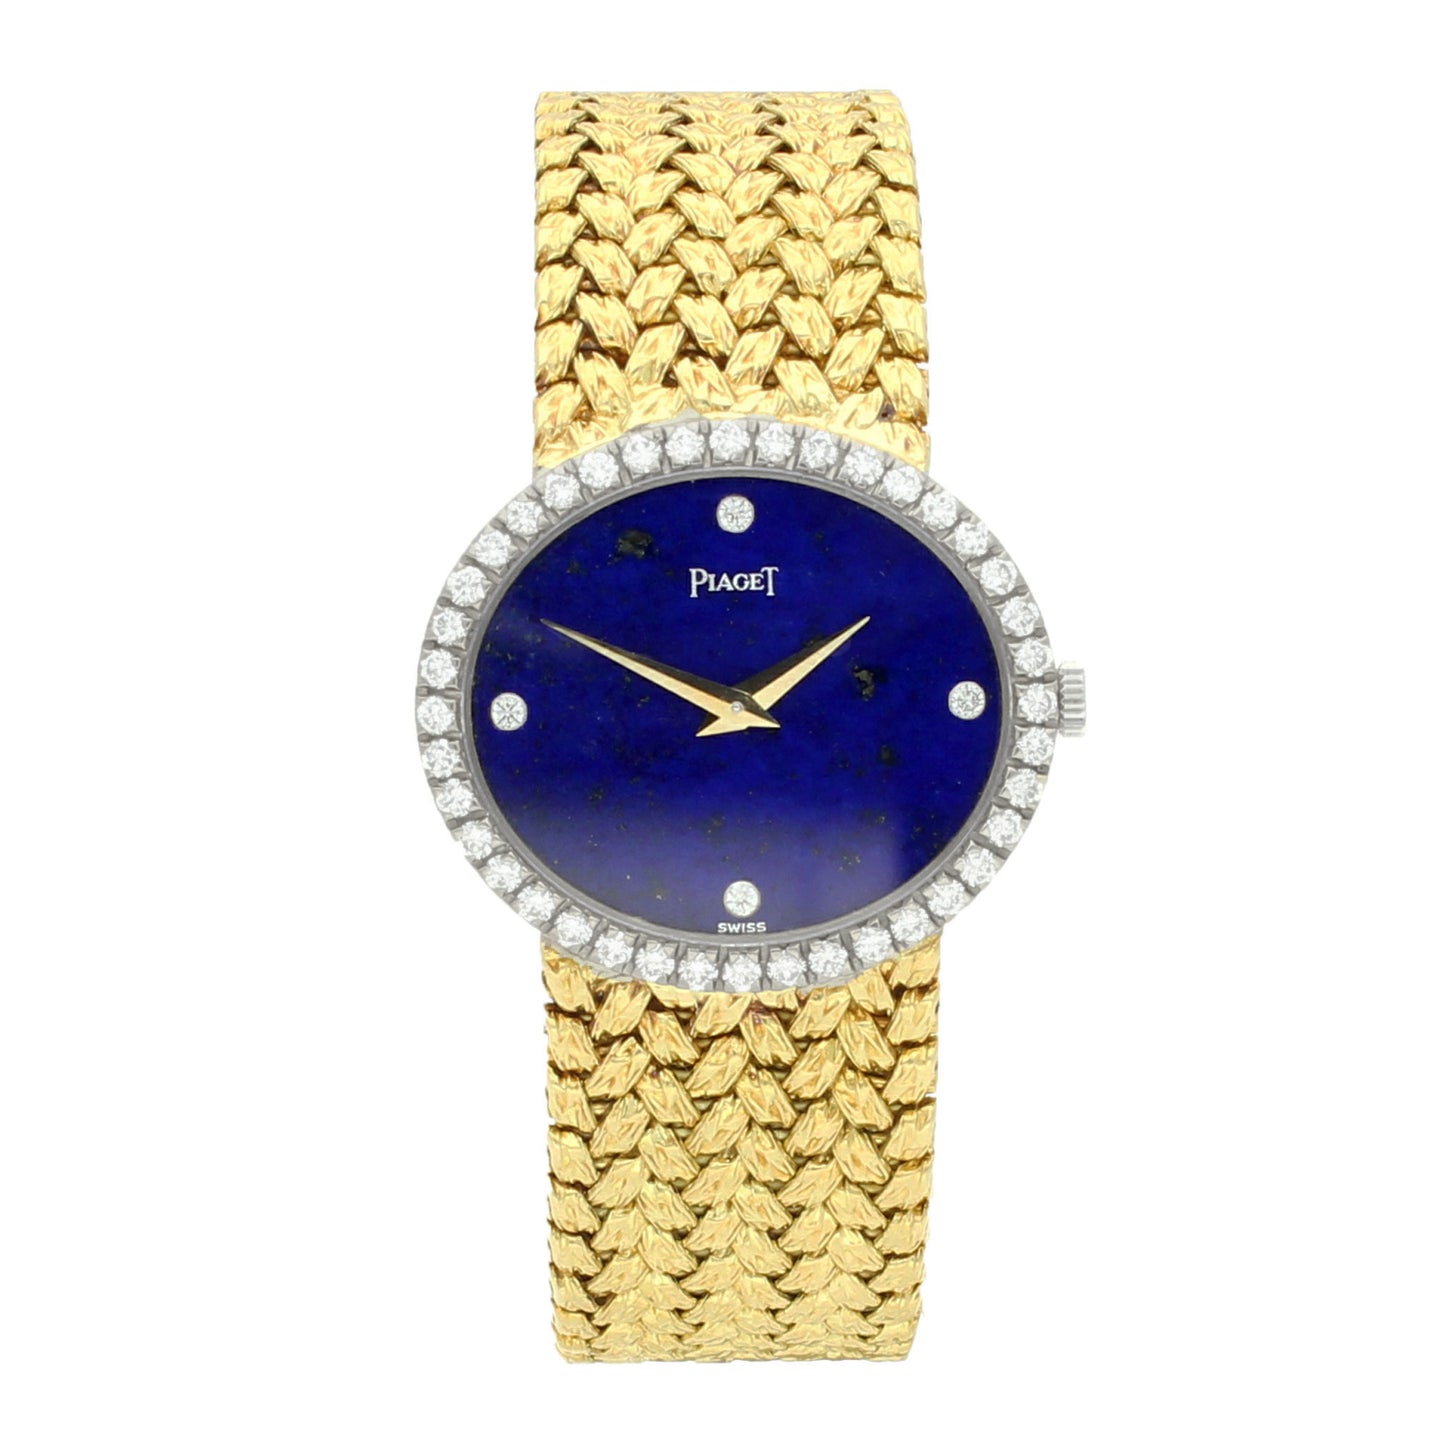 18ct yellow gold 'oval cased' bracelet watch with lapis lazuli dial and diamond set bezel. Made 1970s